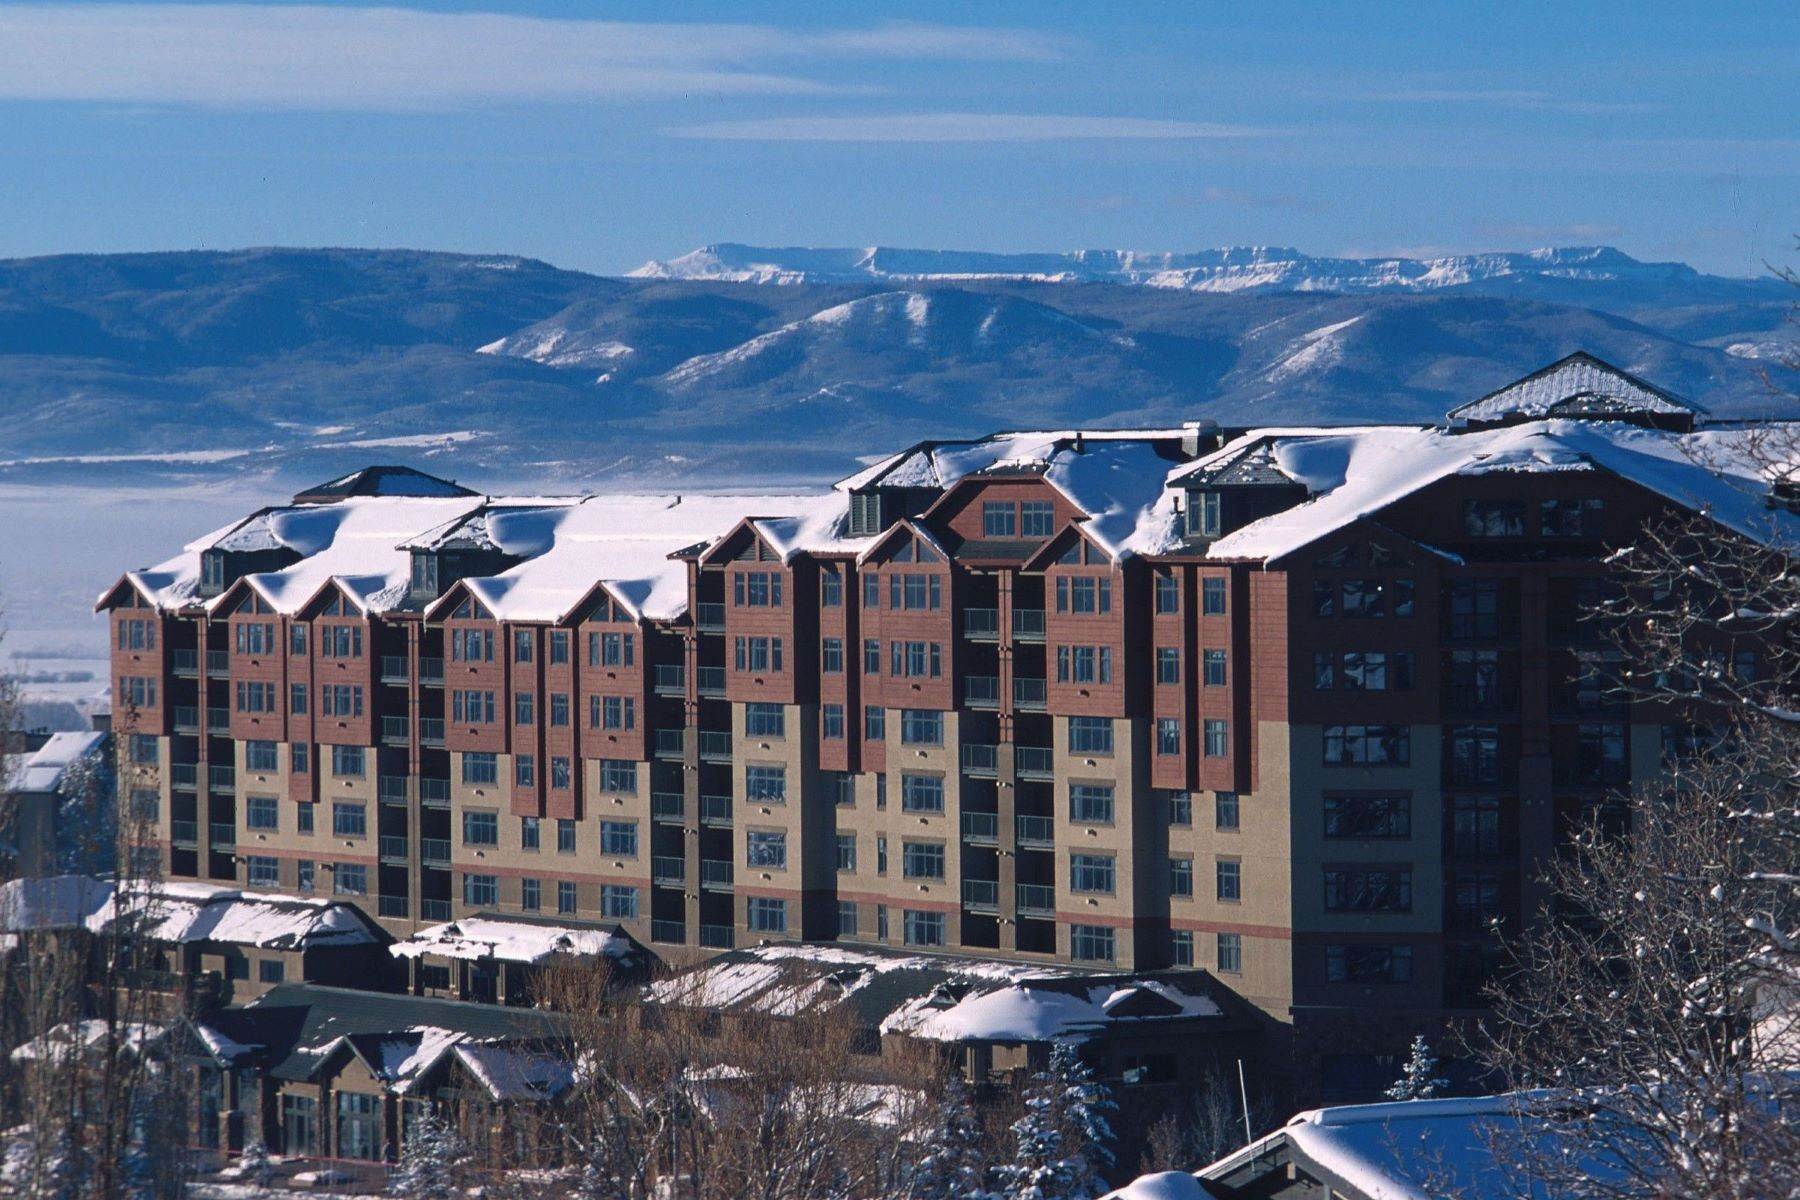 Fractional Ownership Property for Sale at Fractional at The Grand with Ski Area Views 2300 Mount Werner Circle, Unit# 254 Steamboat Springs, Colorado 80487 United States